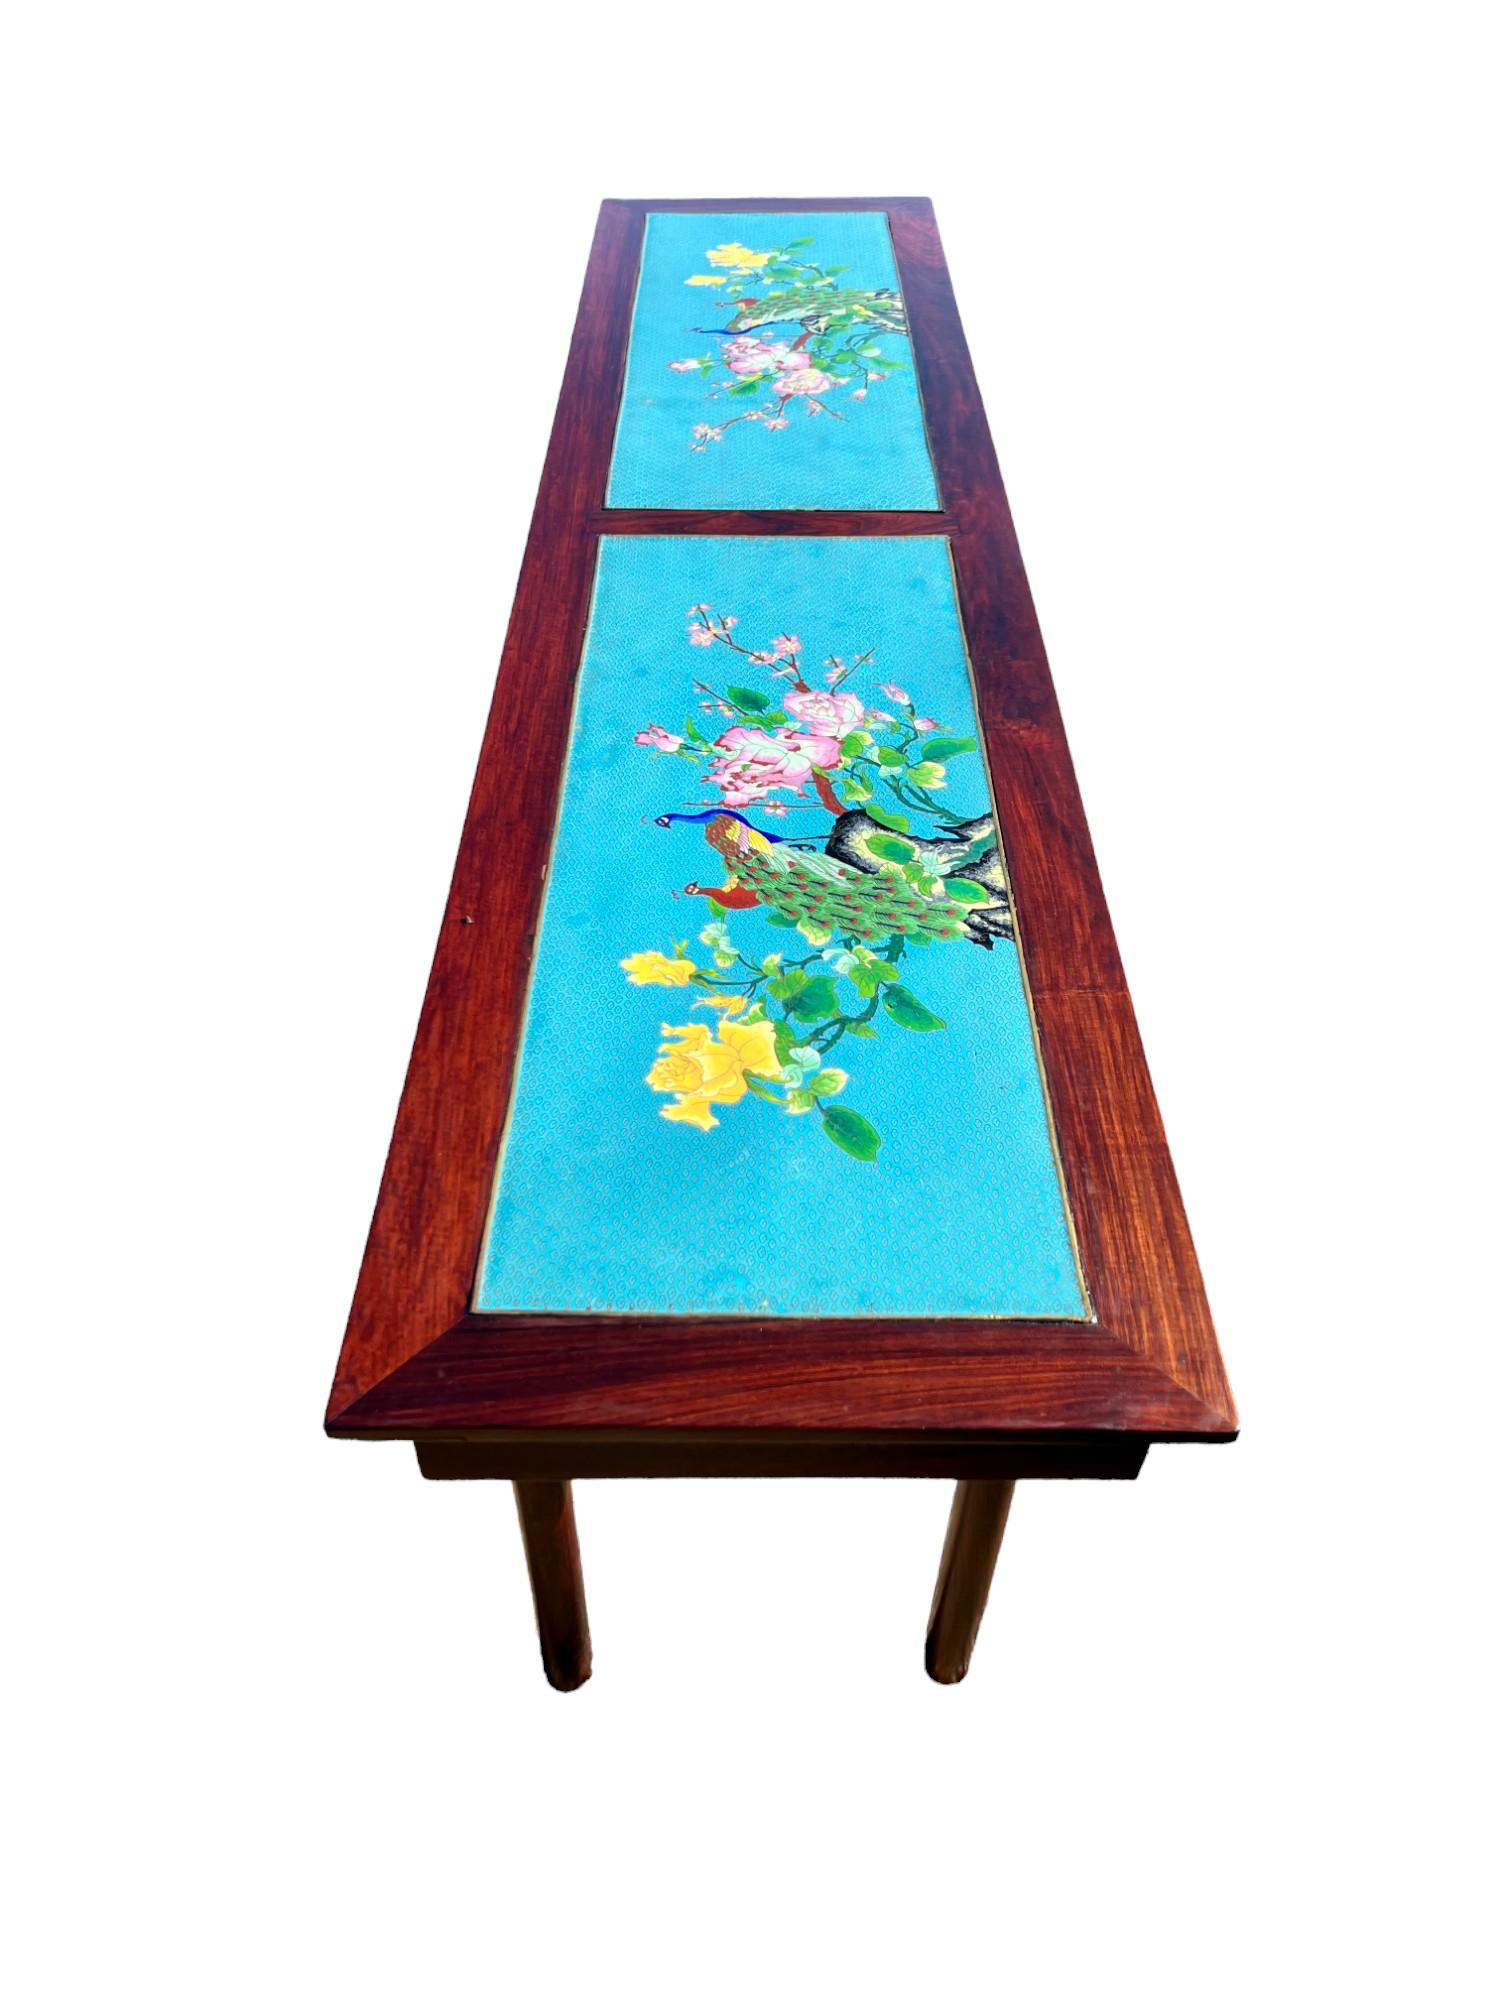 Antique Chinese Cloisonné Inset Rosewood Altar Console Table In Good Condition For Sale In Harlingen, TX